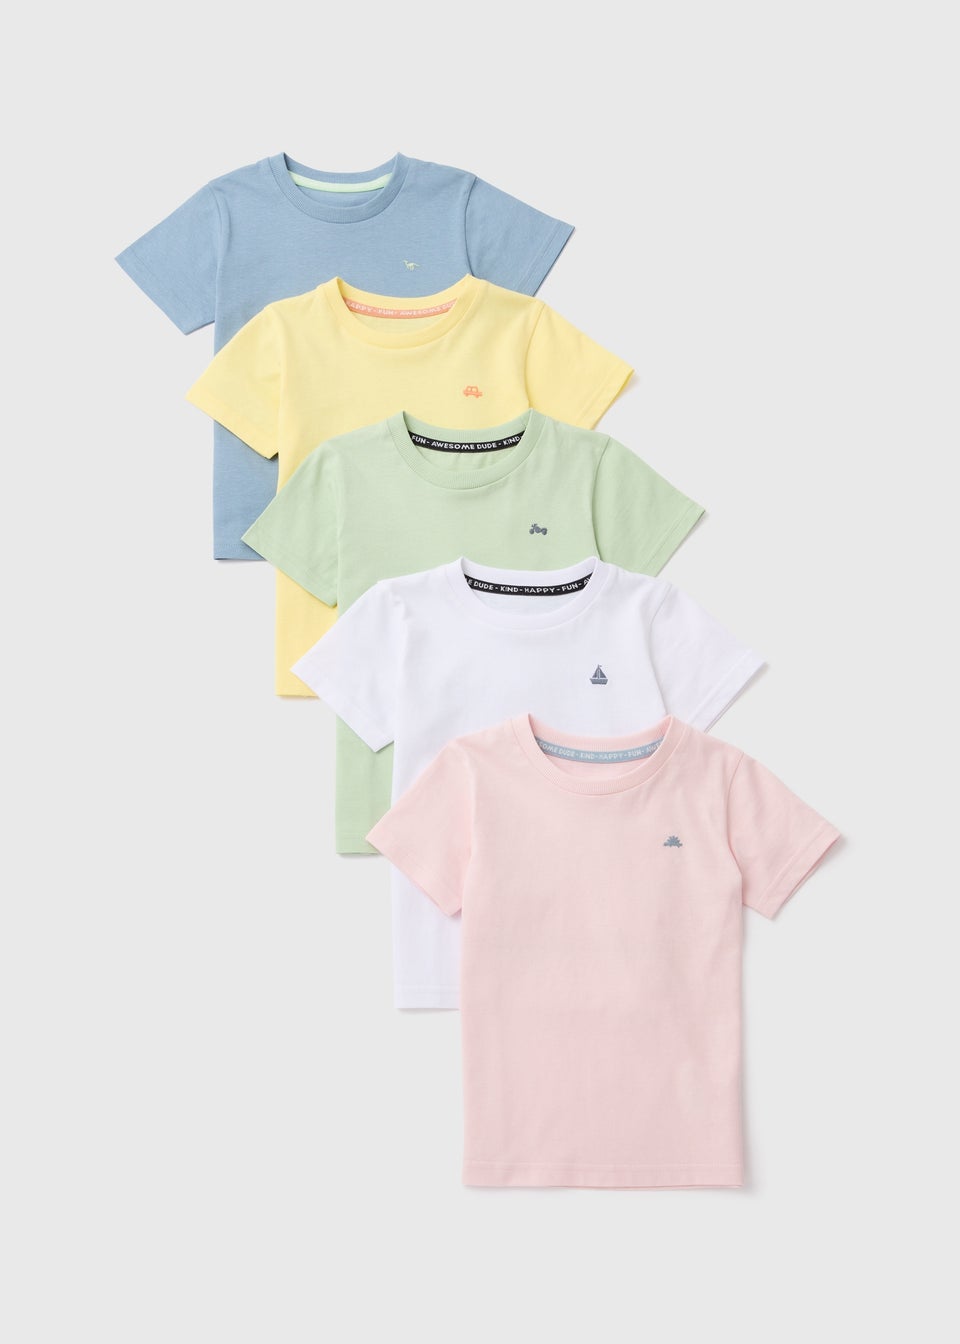 Boys 5 Pack Multicolour Solid Bright T-Shirts (1-7yrs)